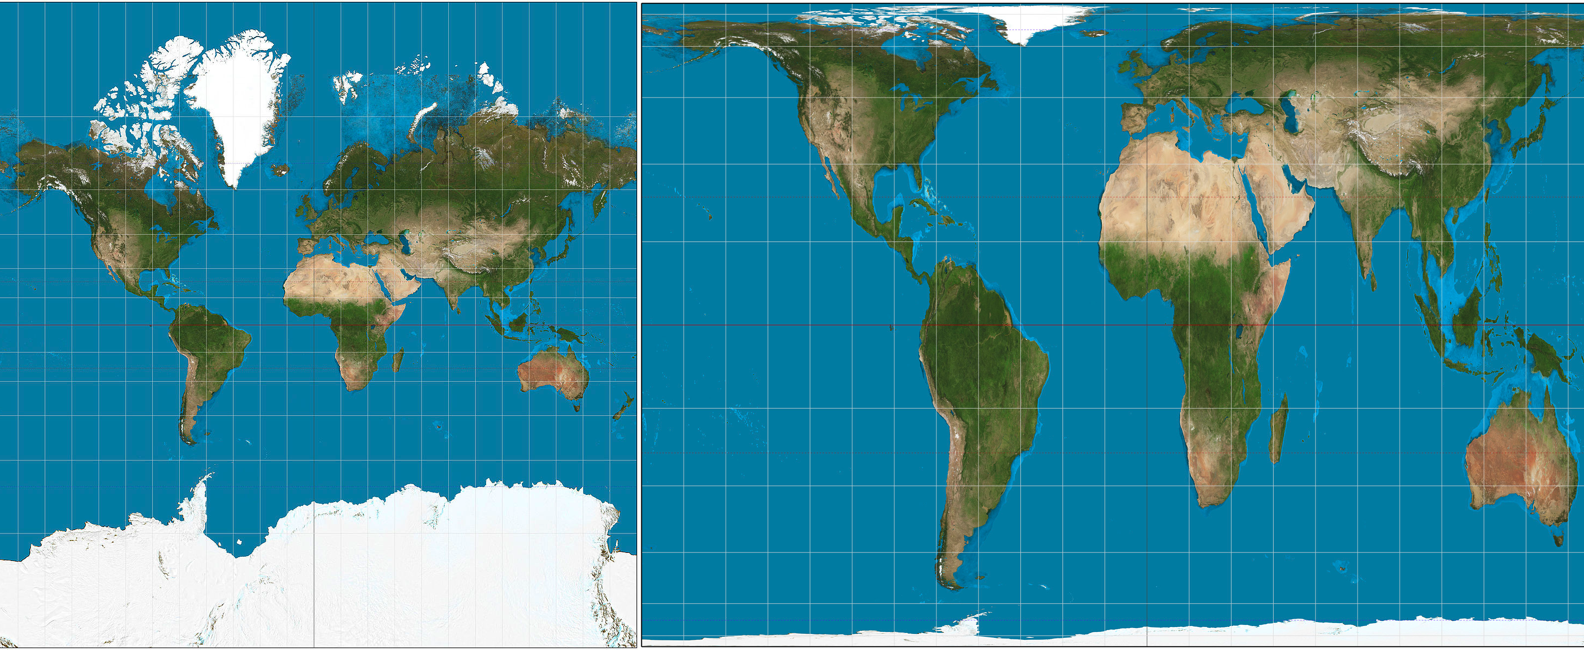 The Mercator Projection, left, and the Gall-Peters Equal Area Projection, right